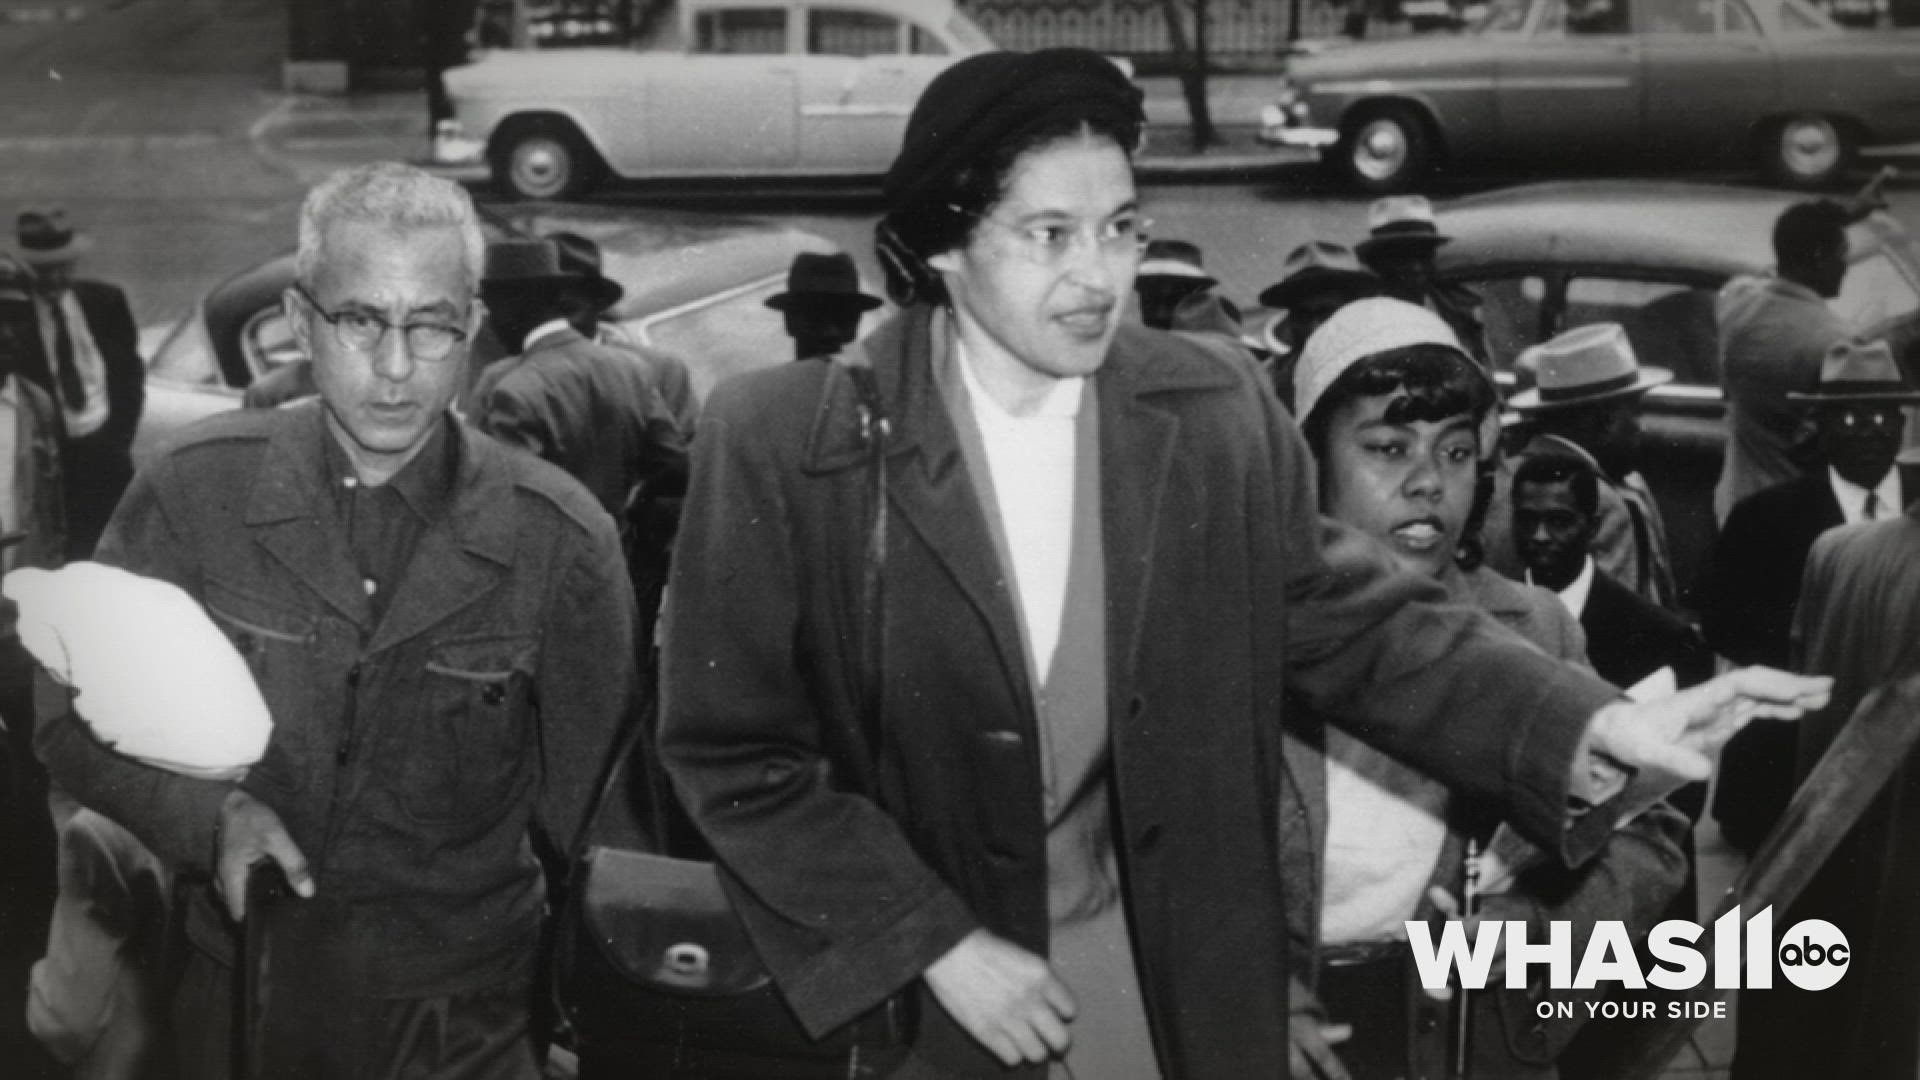 February is Black History Month, here are some quick, interesting facts you may not know!